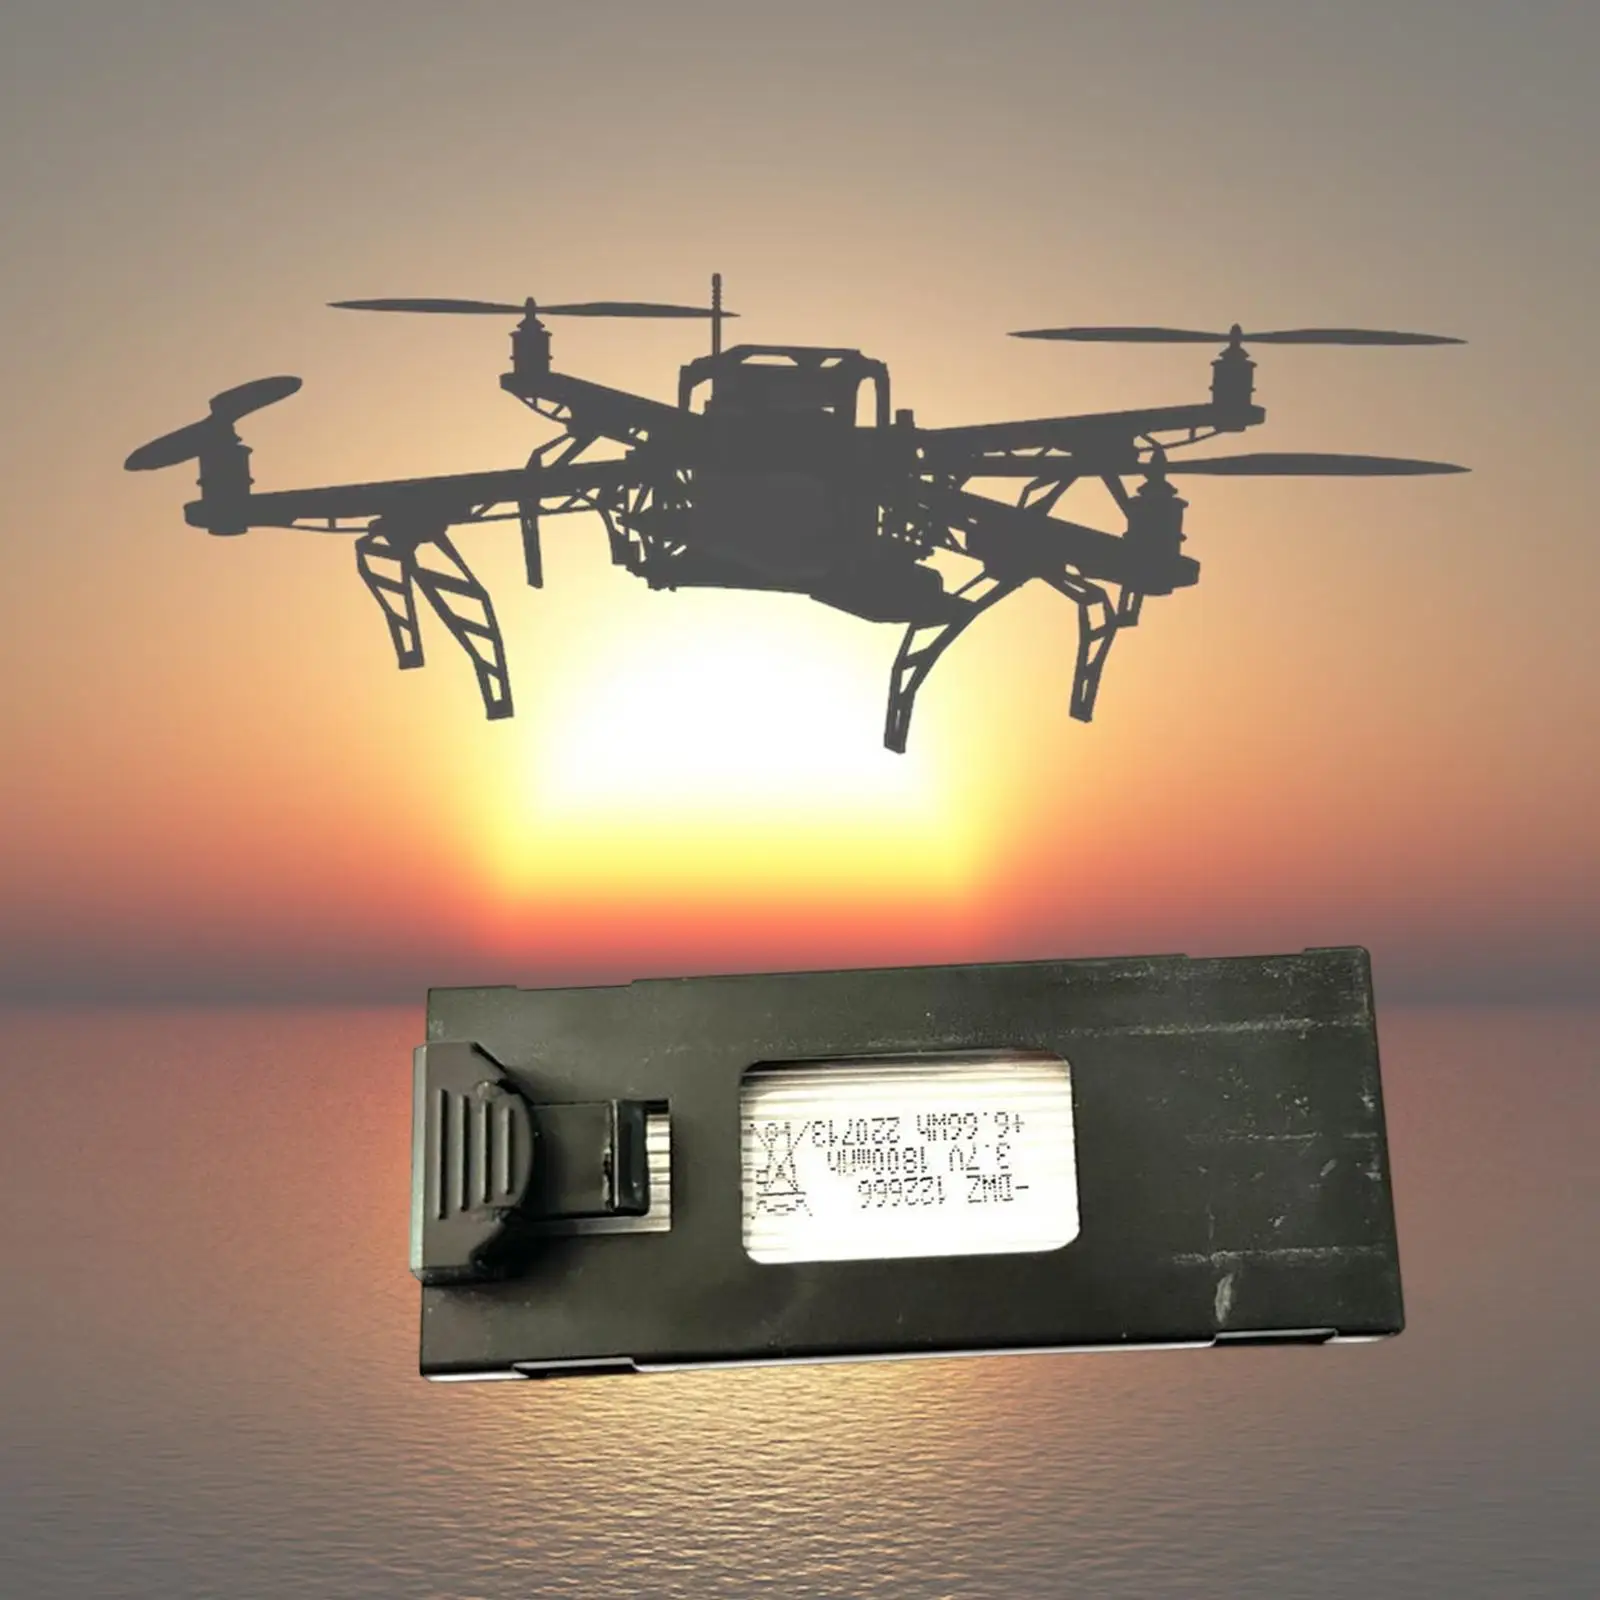 3.7V 1800mAh Lithium battery easily Install Flying Time 10-12Min for H106 RC Drone RC Helicopter RC Aircraft RC Quadcopter